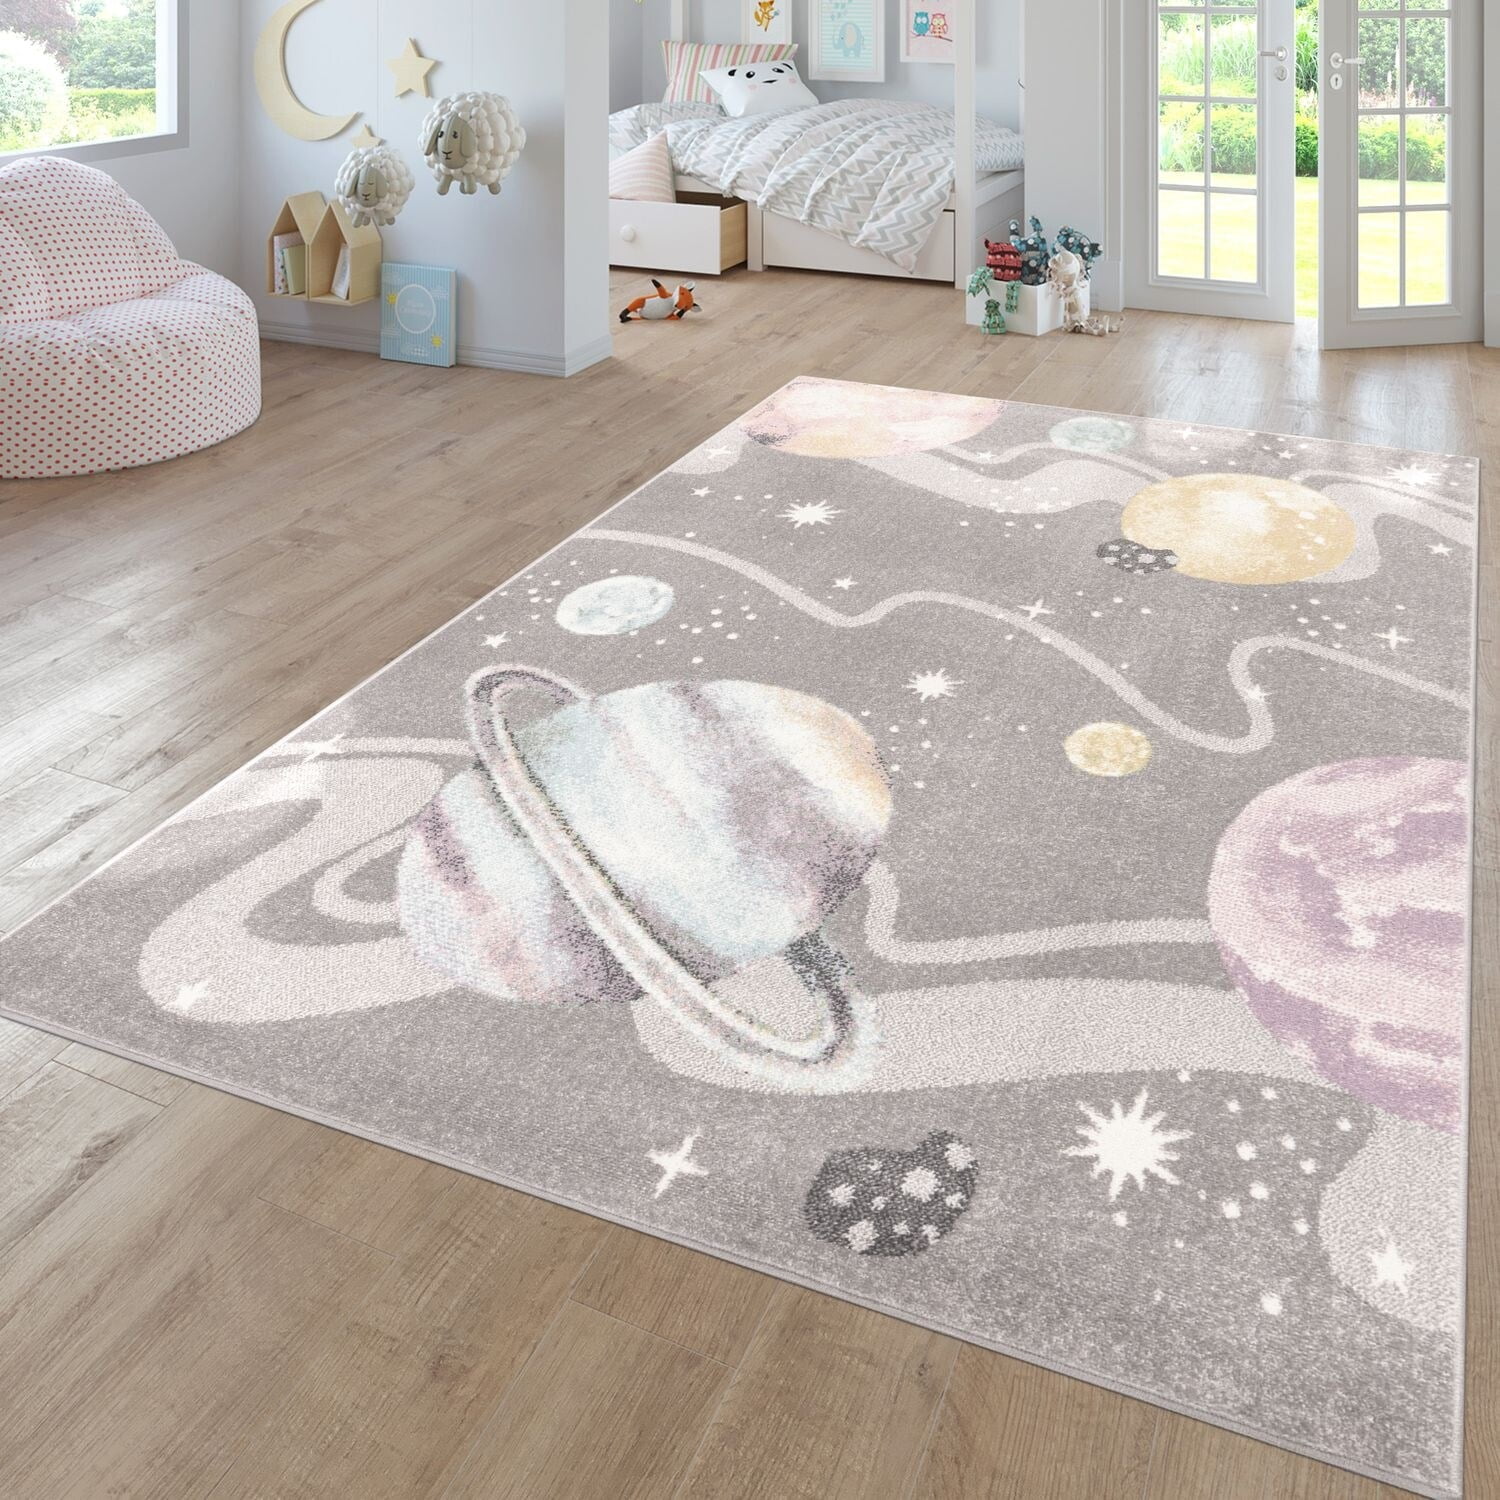 Paco Home Kids Rug for Nursery Mountains Starry-Sky in Light Blue Cream  Pastel 5'3 x 7'7 5' x 8' Rectangle